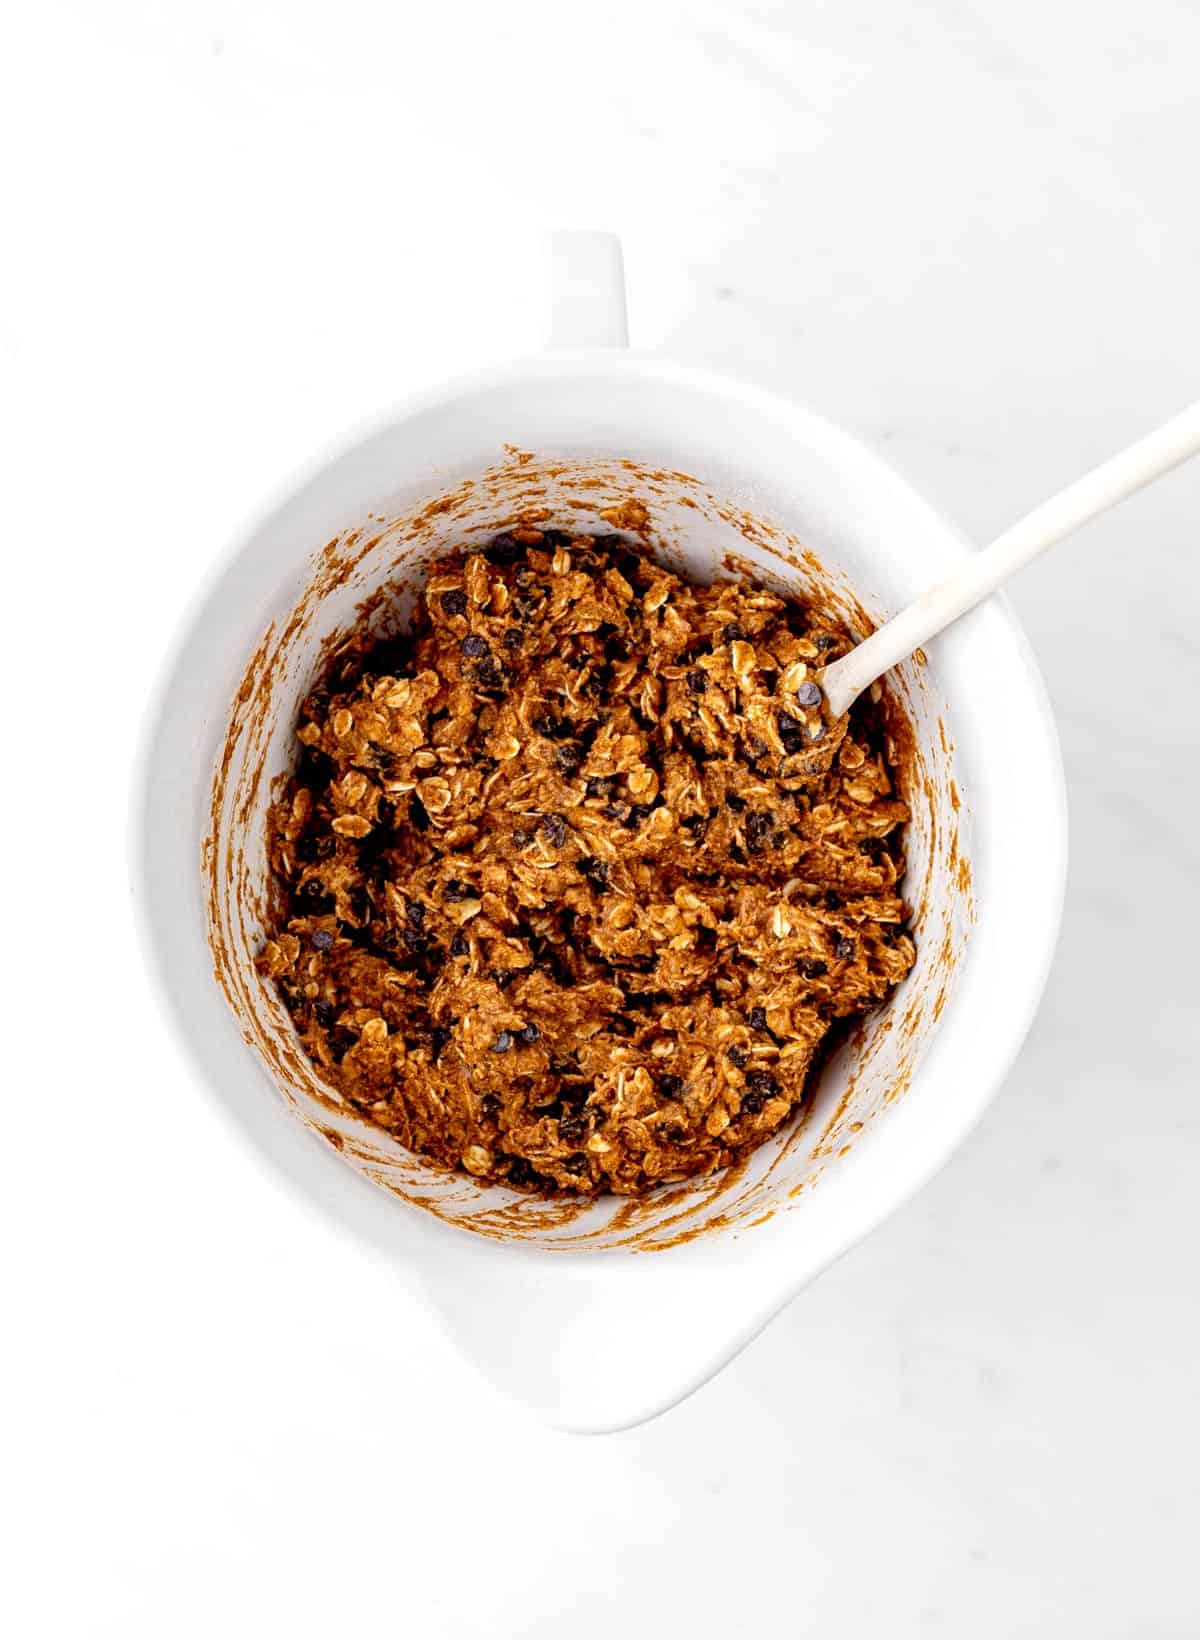 Chocolate chips added into the banana pumpkin mixture in a white bowl.